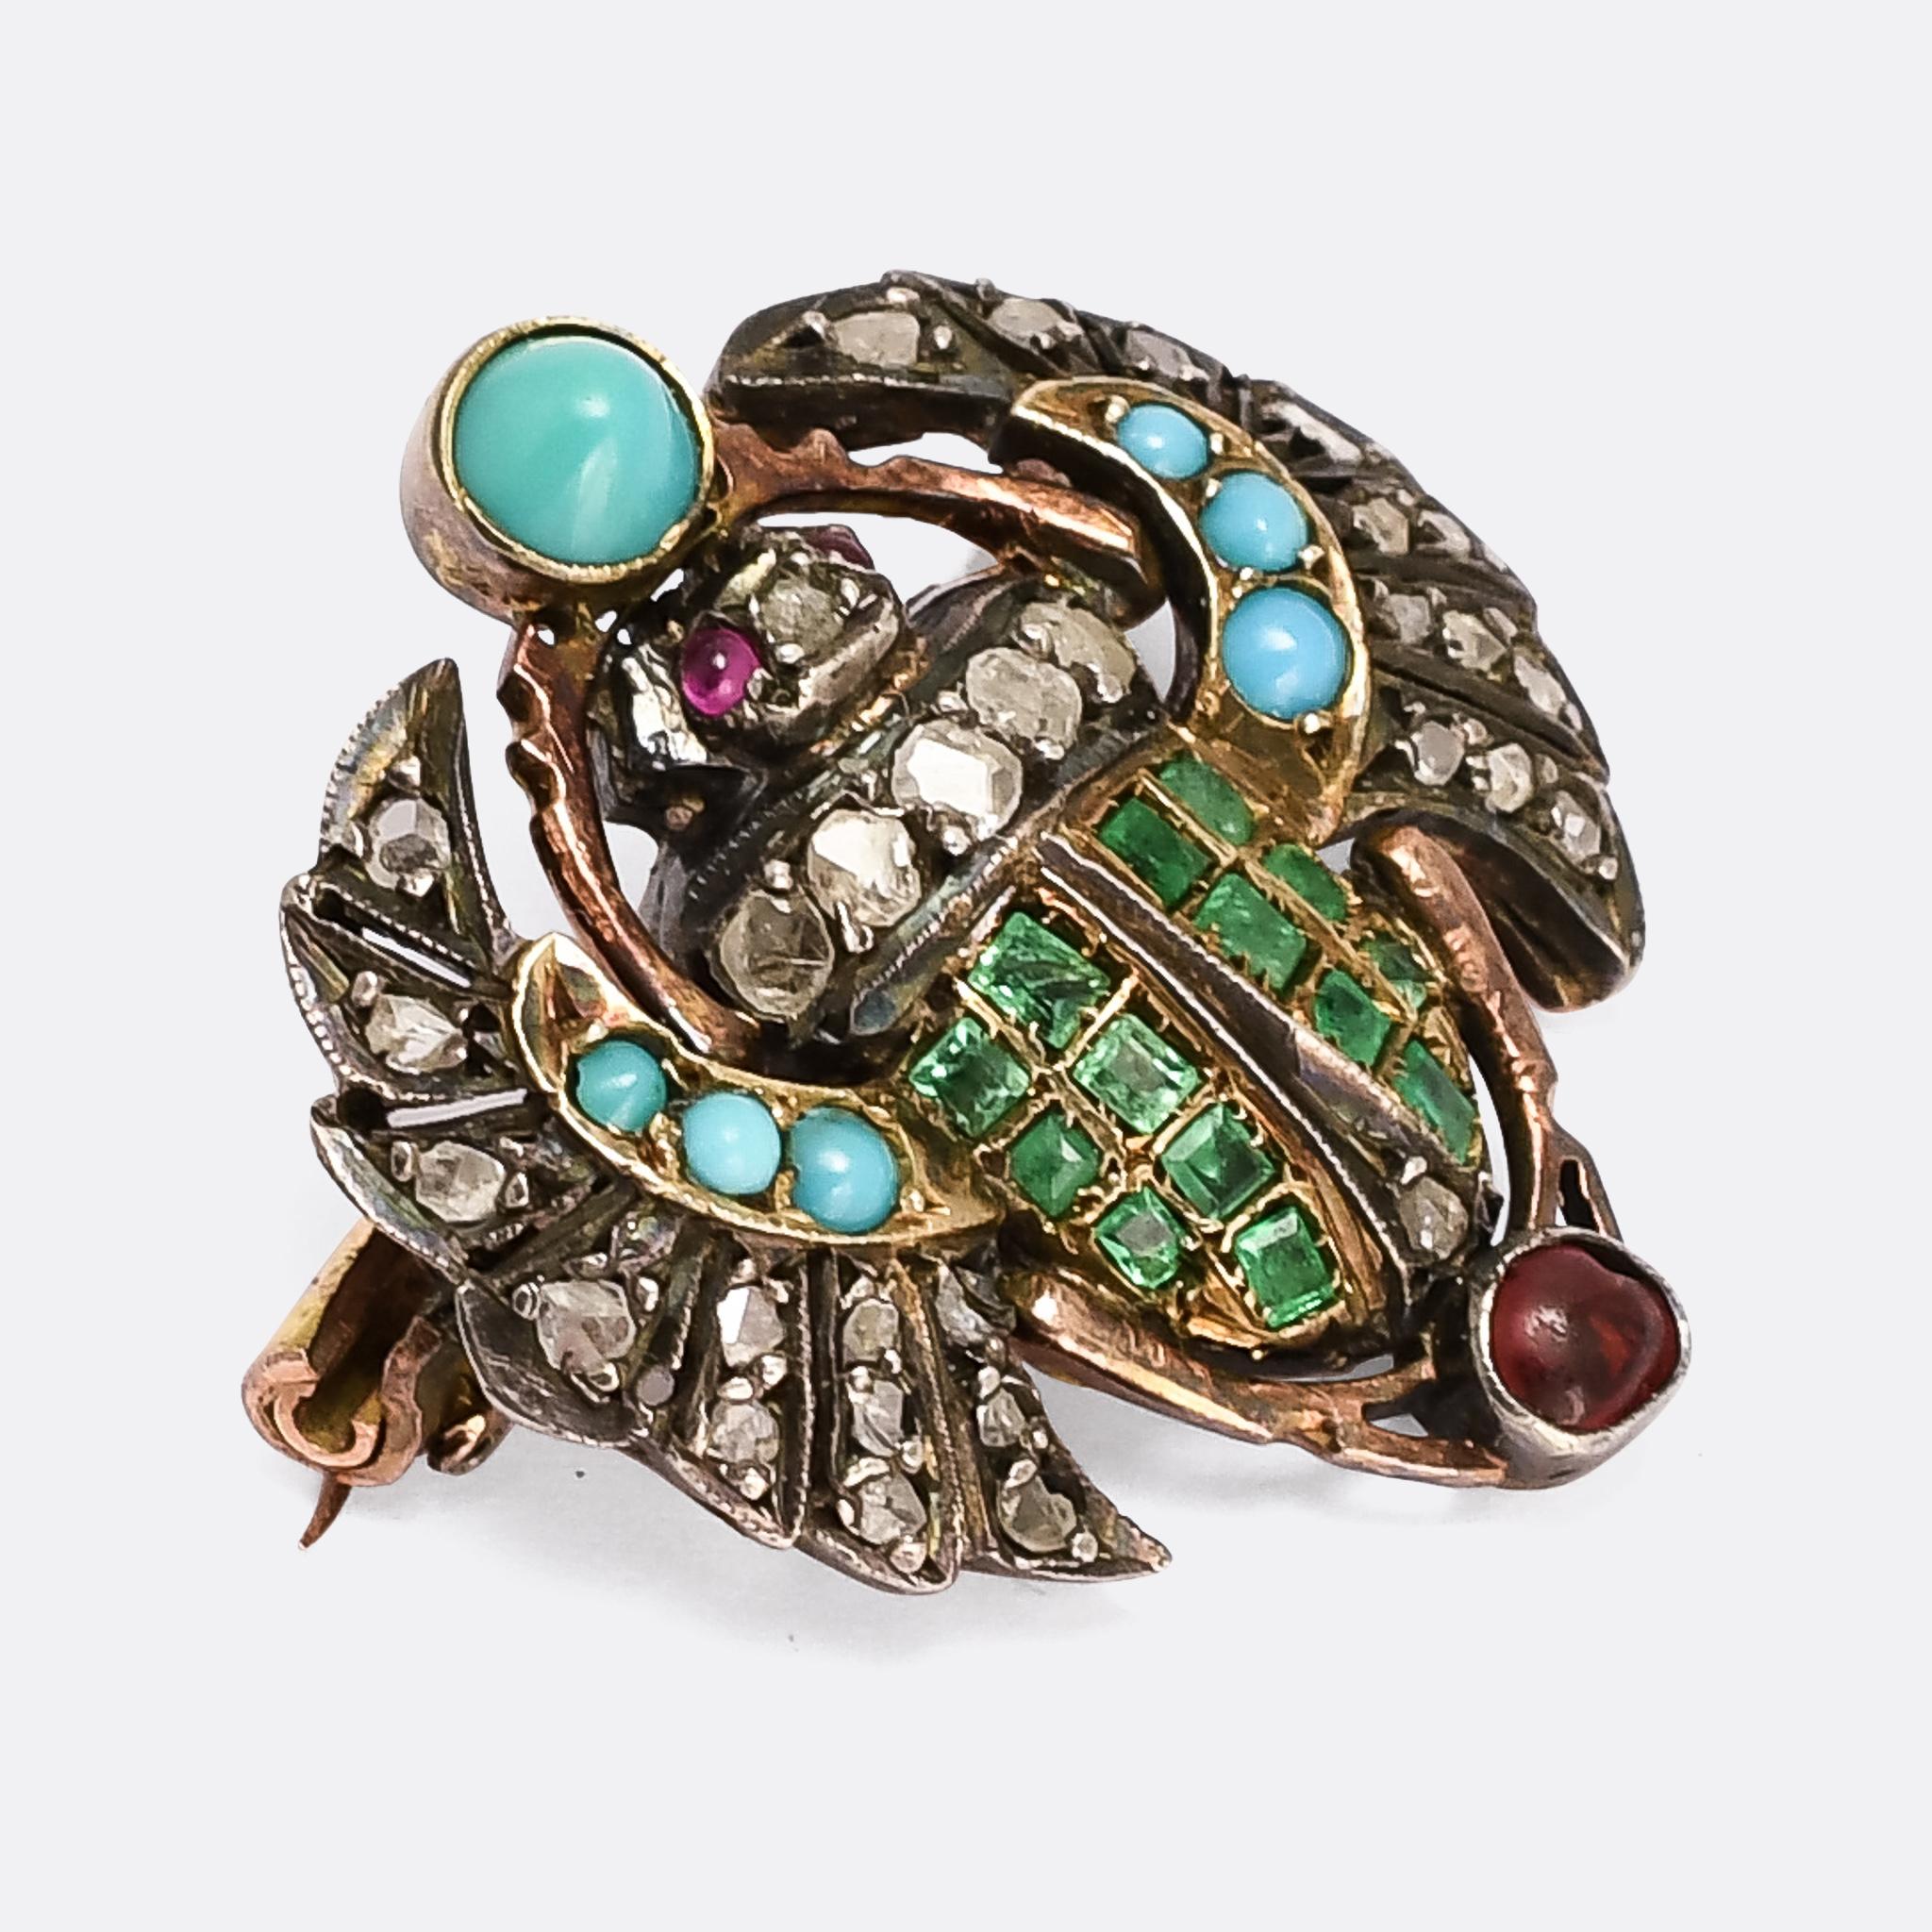 An incredible Victorian Egyptian Revival winged scarab brooch dating from the 1880s. It's expertly crafted, and set with an array of coloured gemstones, including emerald, ruby, and turquoise, as well as rose cut diamonds. The scarab was highly